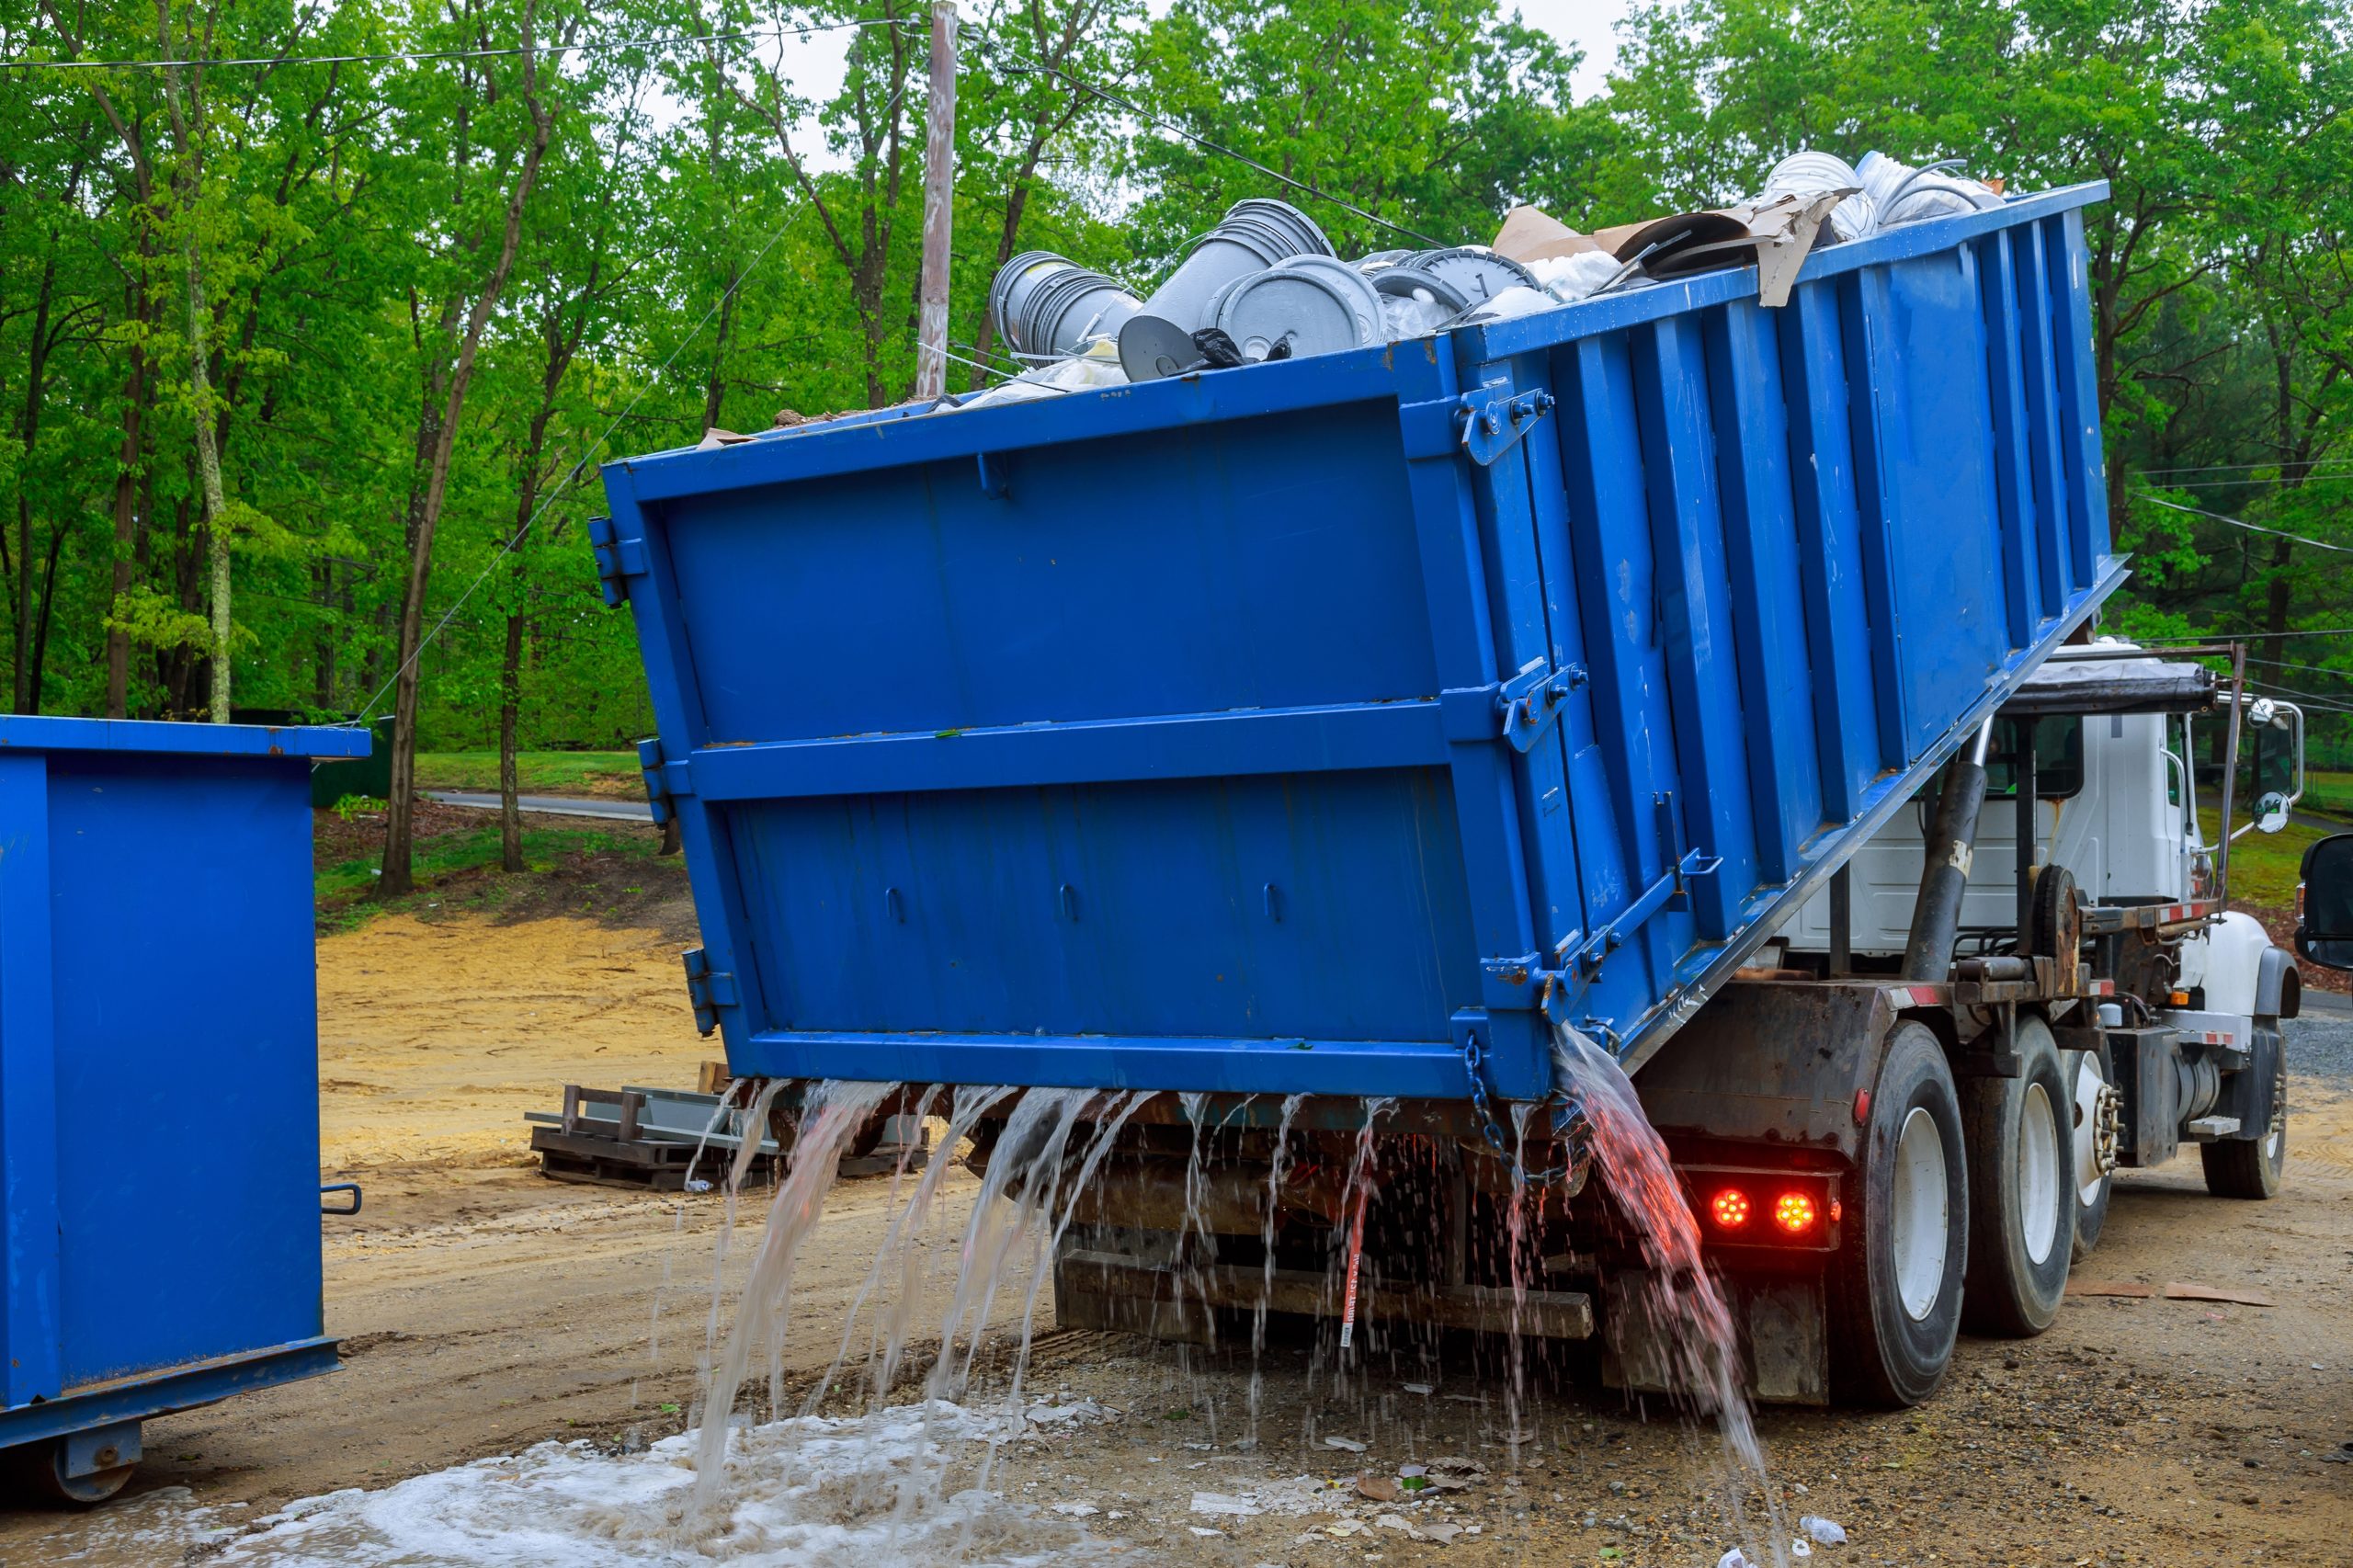 Junk Removal Wisconsin Dells, WI | HitJunk Junk Removal and Trash Haul Away Service